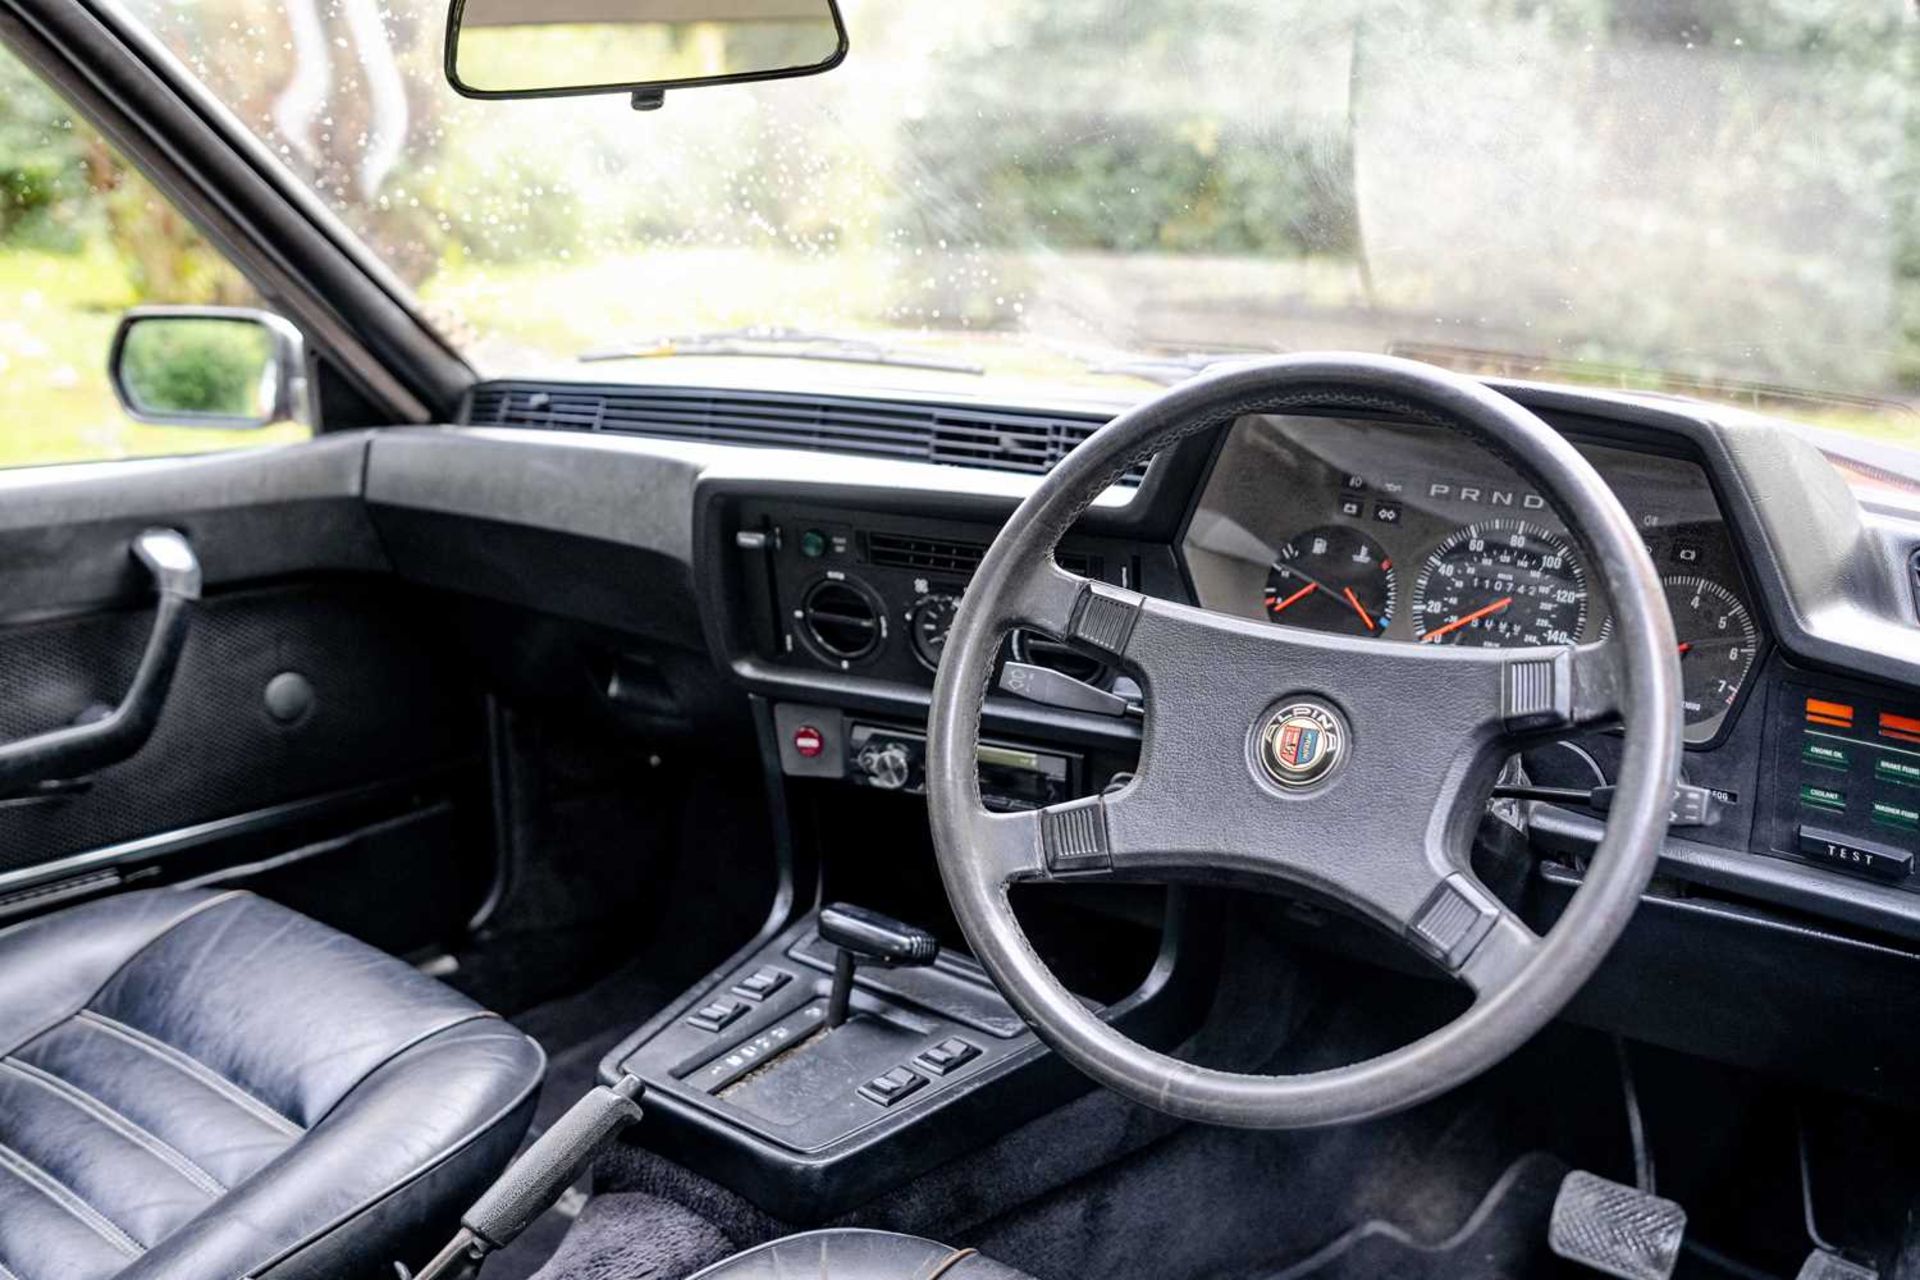 1979 BMW 633 CSi A very smartly-presented, 110,735-mile automatic 633CSi - resprayed and serviced wi - Image 42 of 57